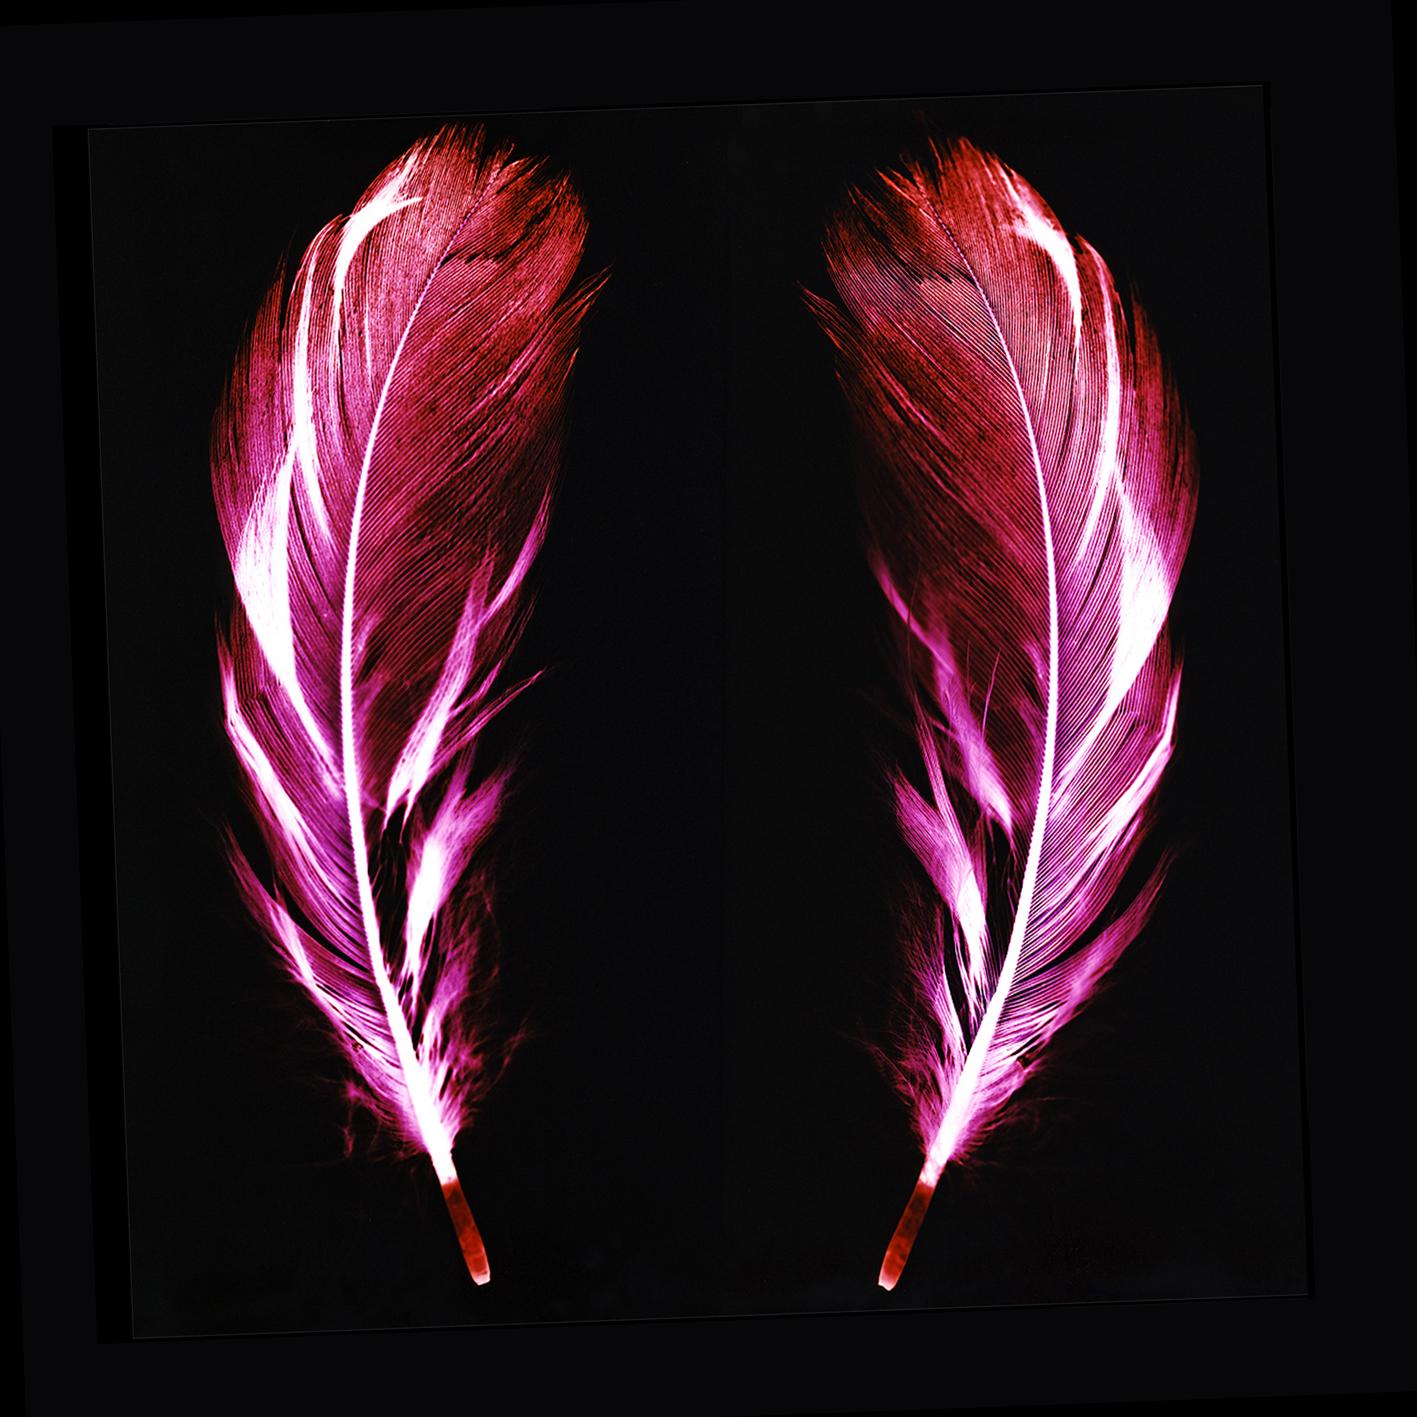 Natasha Heidler Abstract Photograph - Flight of Fancy - Electric Pink Feathers - Conceptual, Color Photography